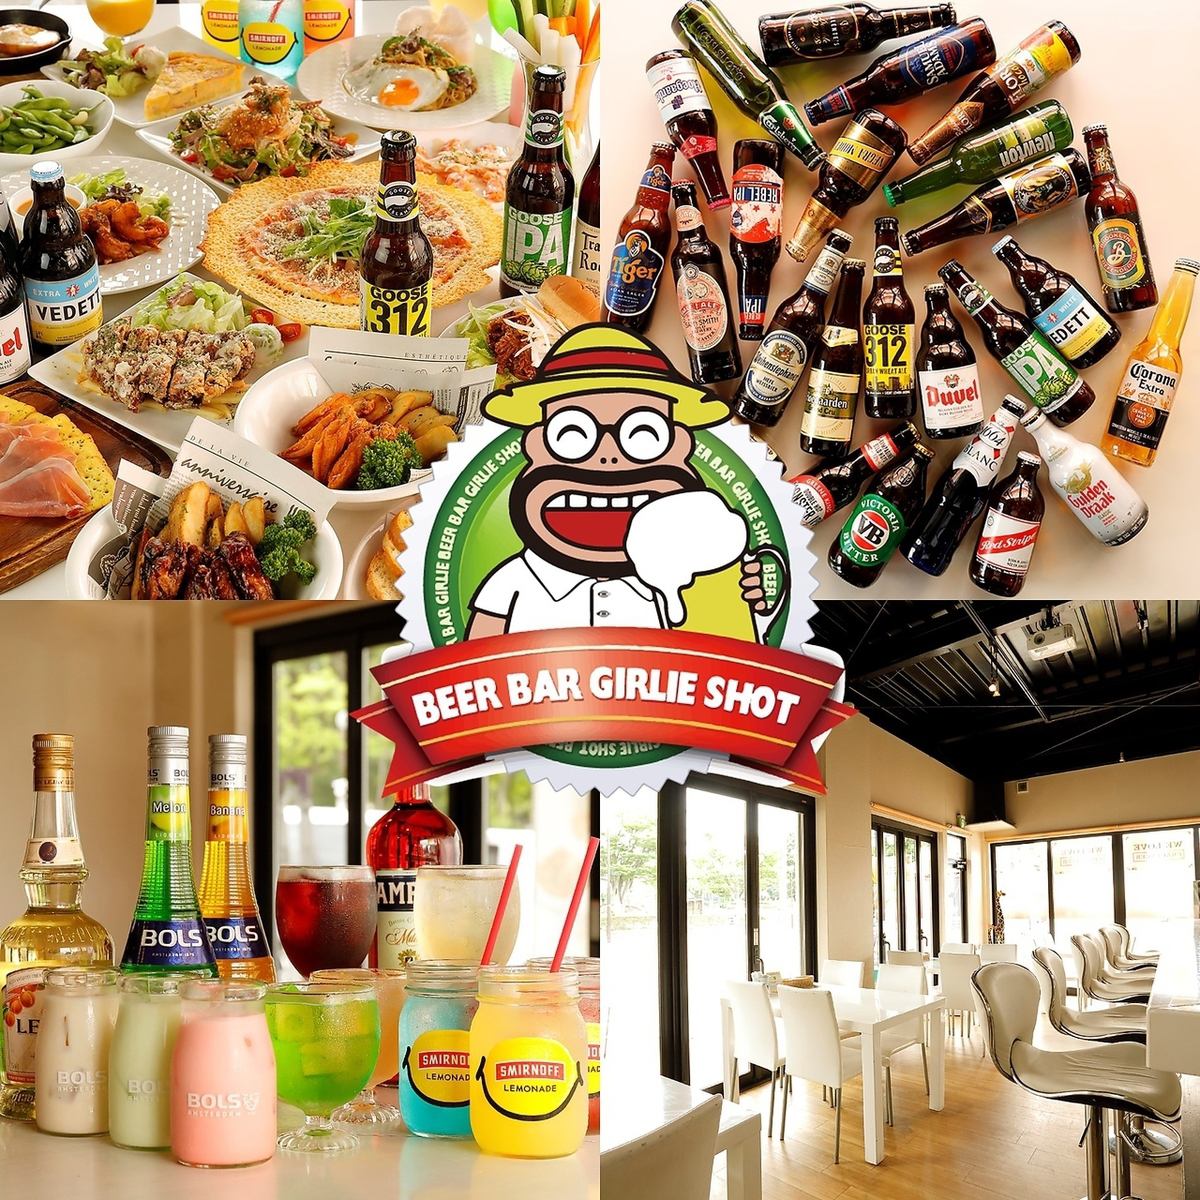 ★ All-you-can-eat and drink for unlimited hours every day ★